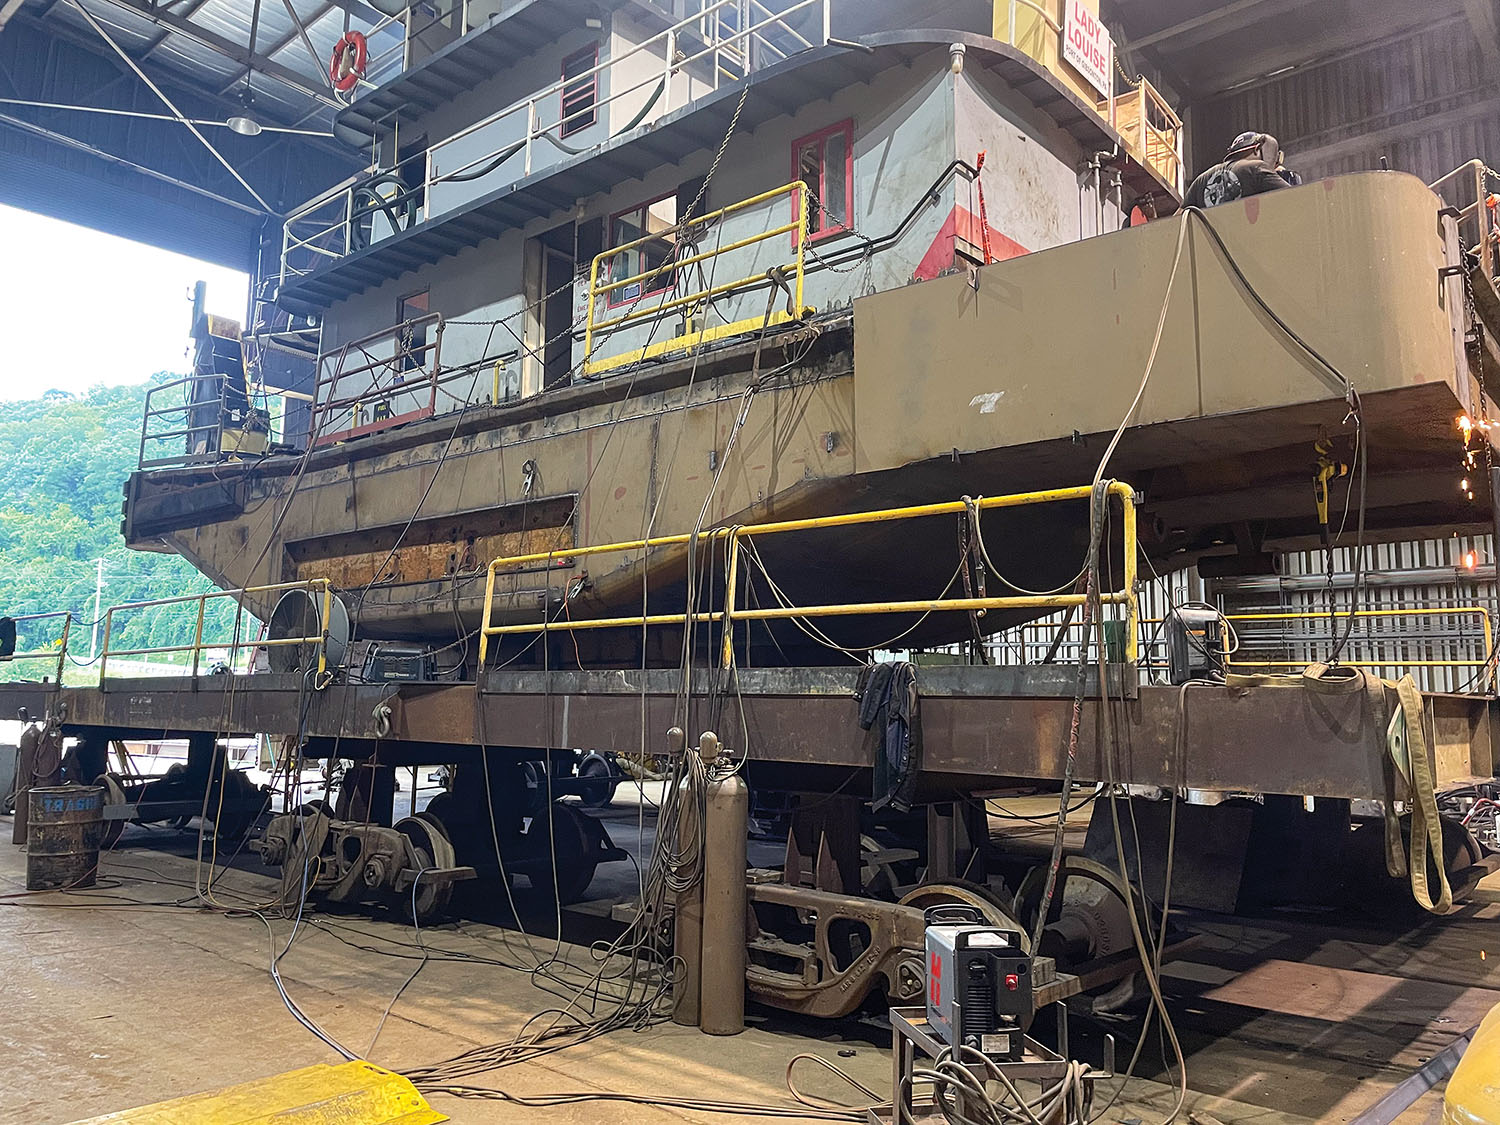 The mv. Lady Louise of Three Rivers Marine & Rail Terminals is being re-hulled by Superior Marine of South Point, Ohio. Work on the vessel has been ongoing since April and is expected to be complete in the second week of October. (Photo courtesy of Superior Marine Inc.)